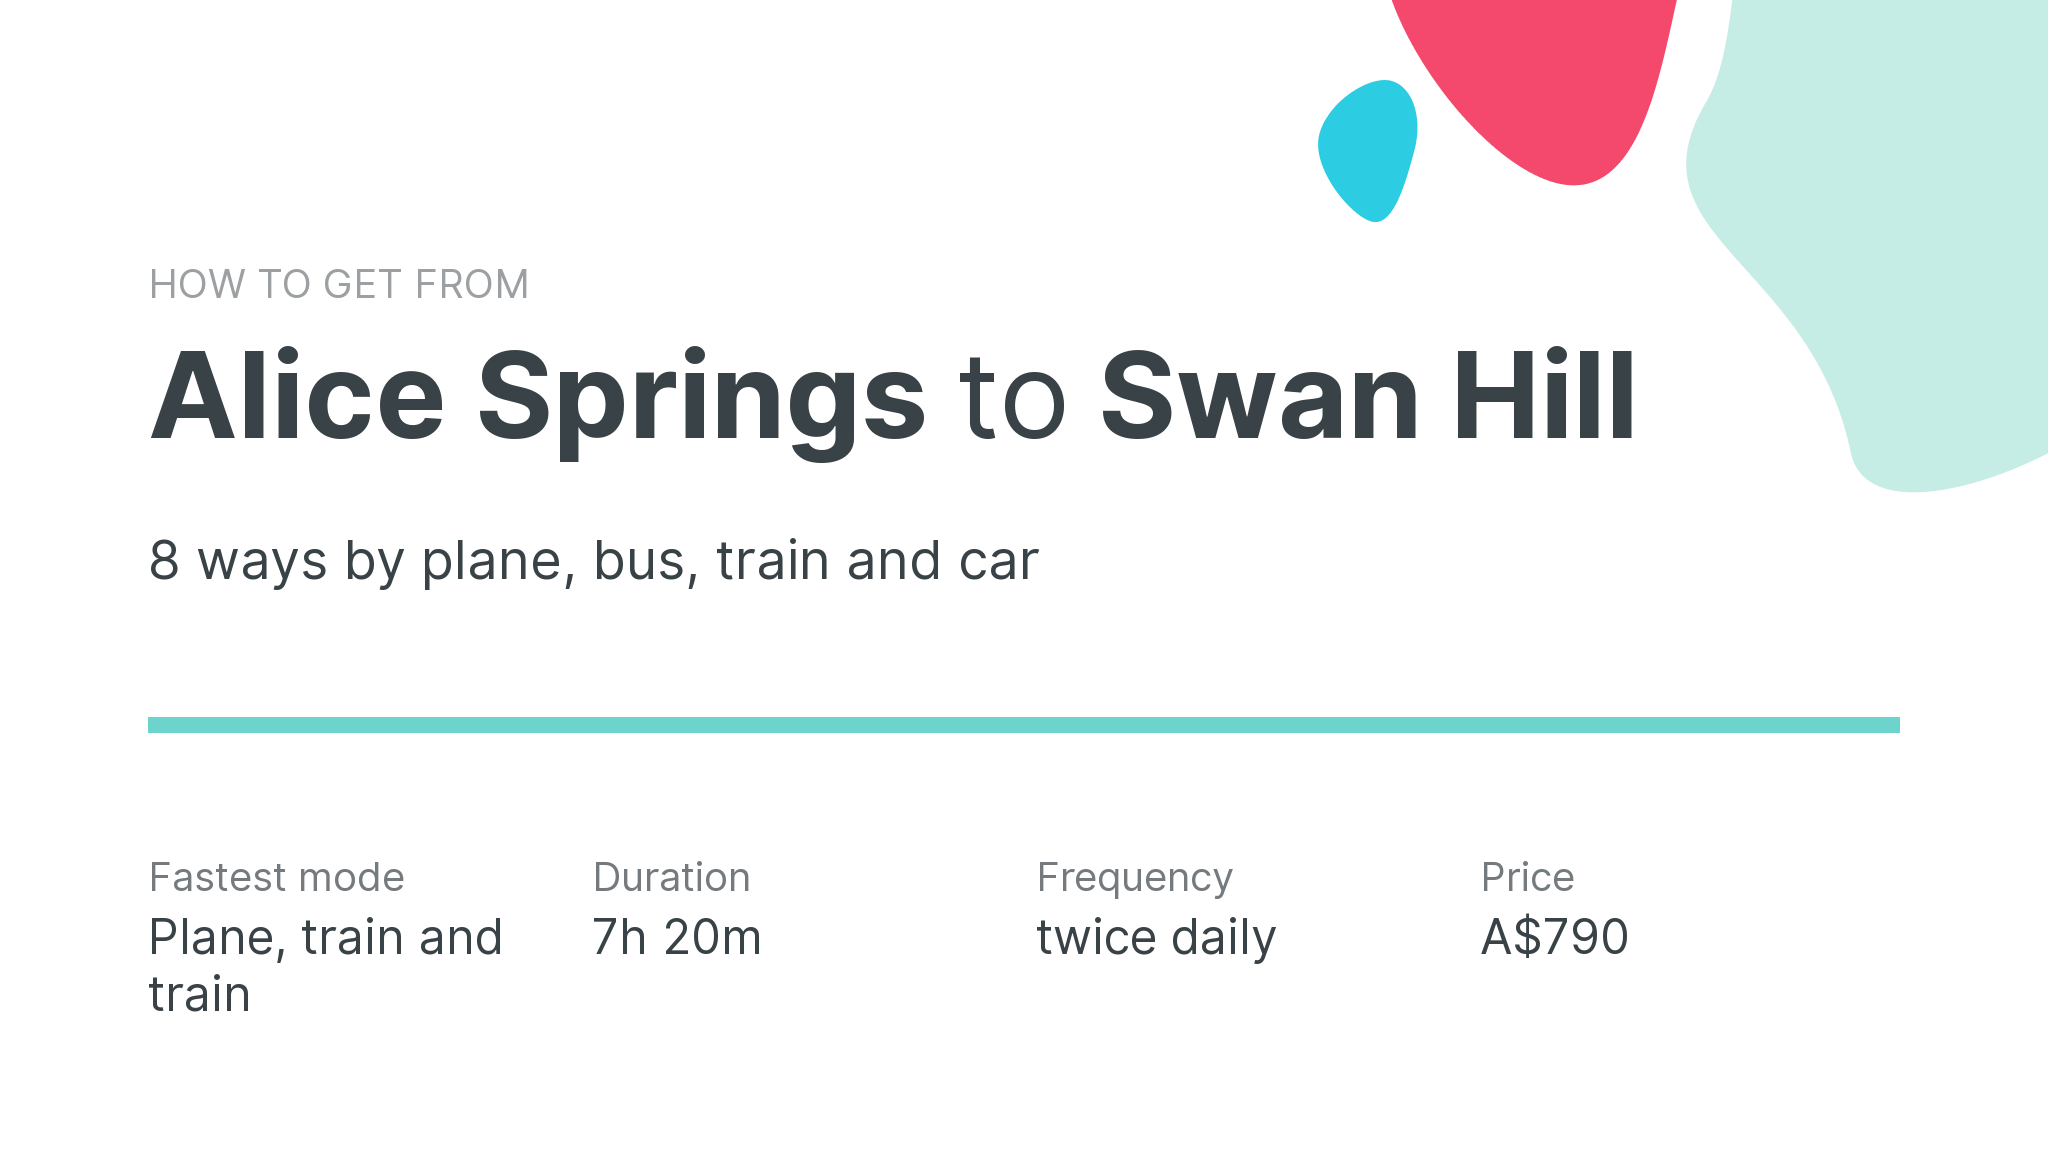 How do I get from Alice Springs to Swan Hill